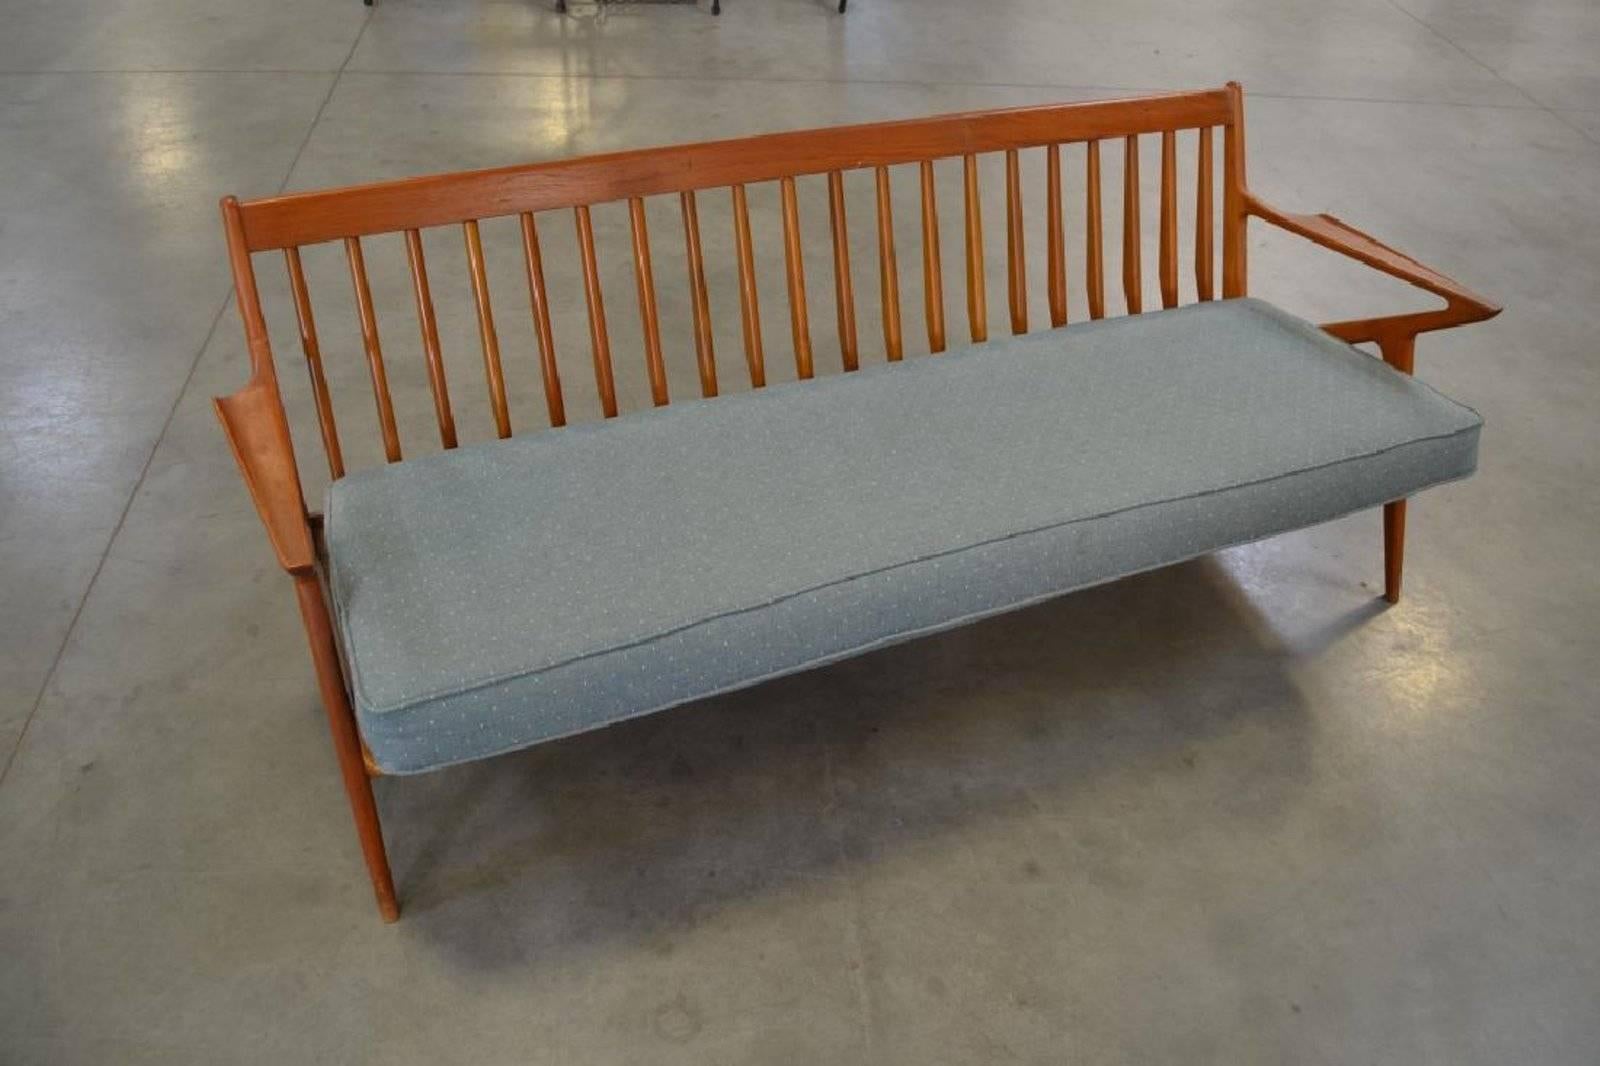 Signed Selig with the metal tag.
Poul Jenson Danish teak Z sofa by Selig. 
69 long.